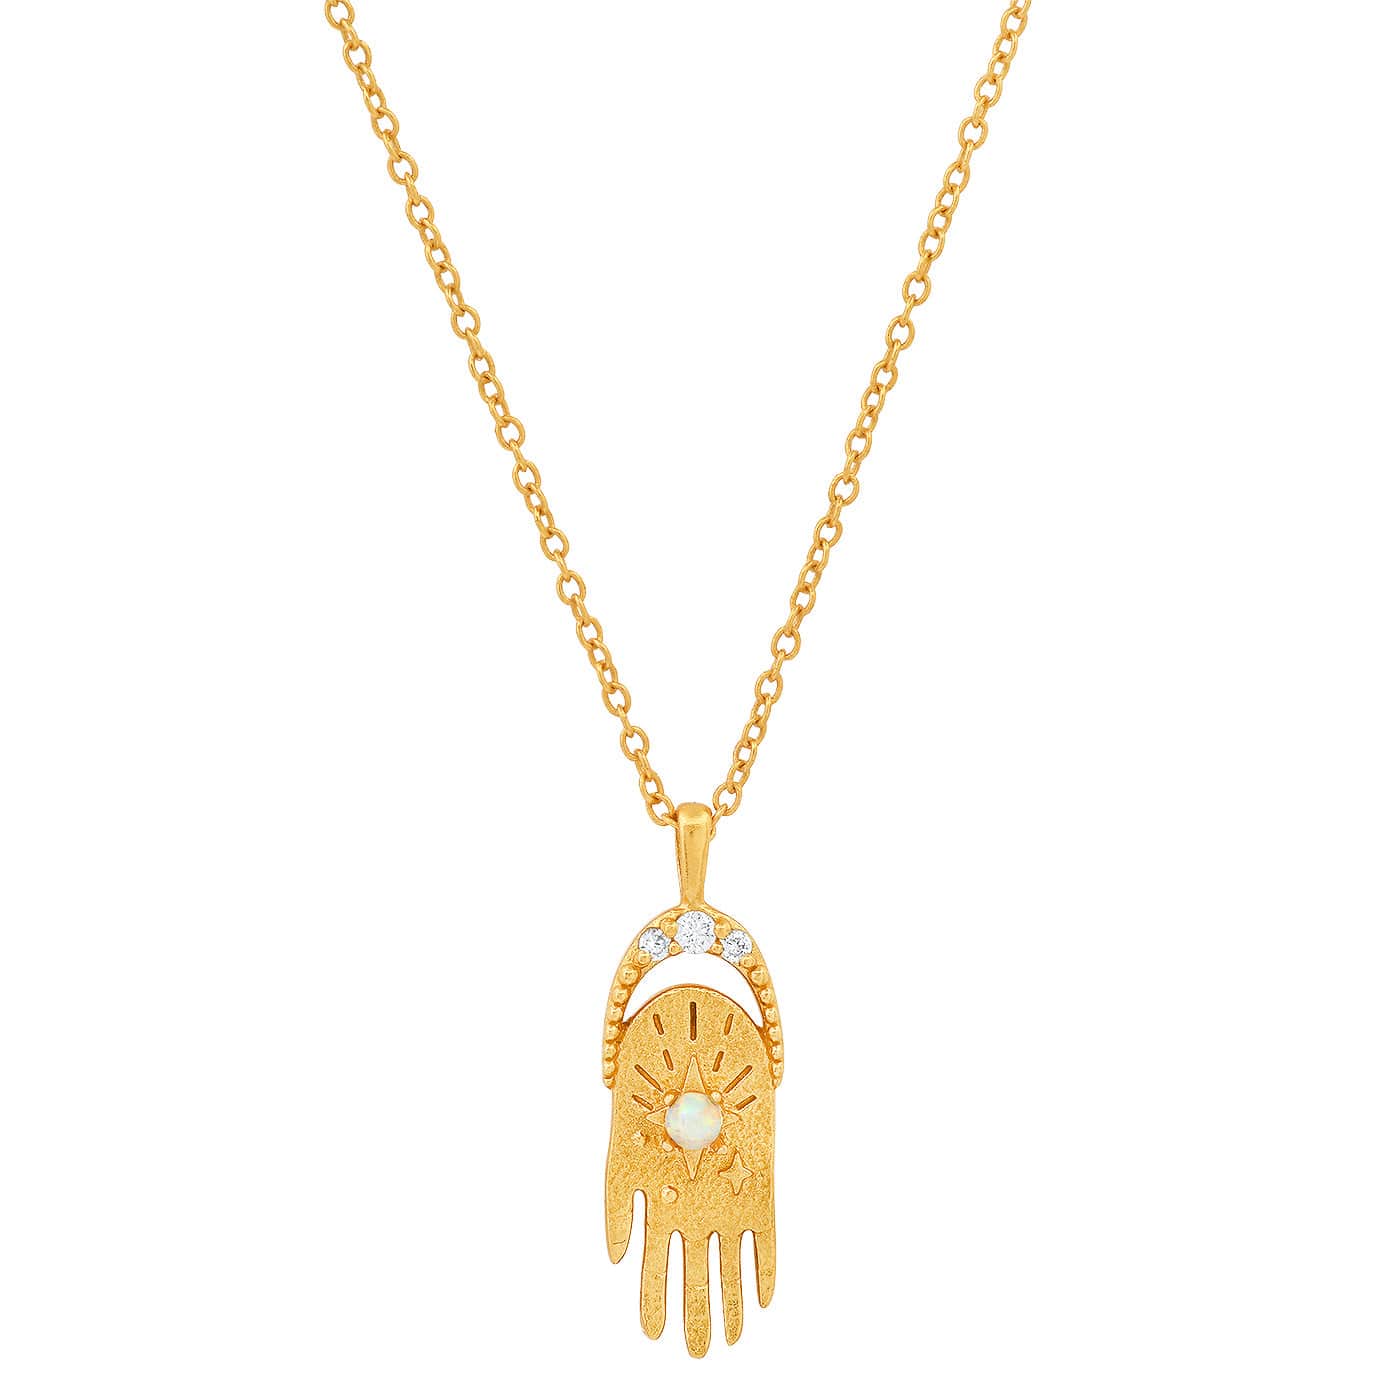 NKL-GPL Hamsa Necklace with CZ and Opal Accents